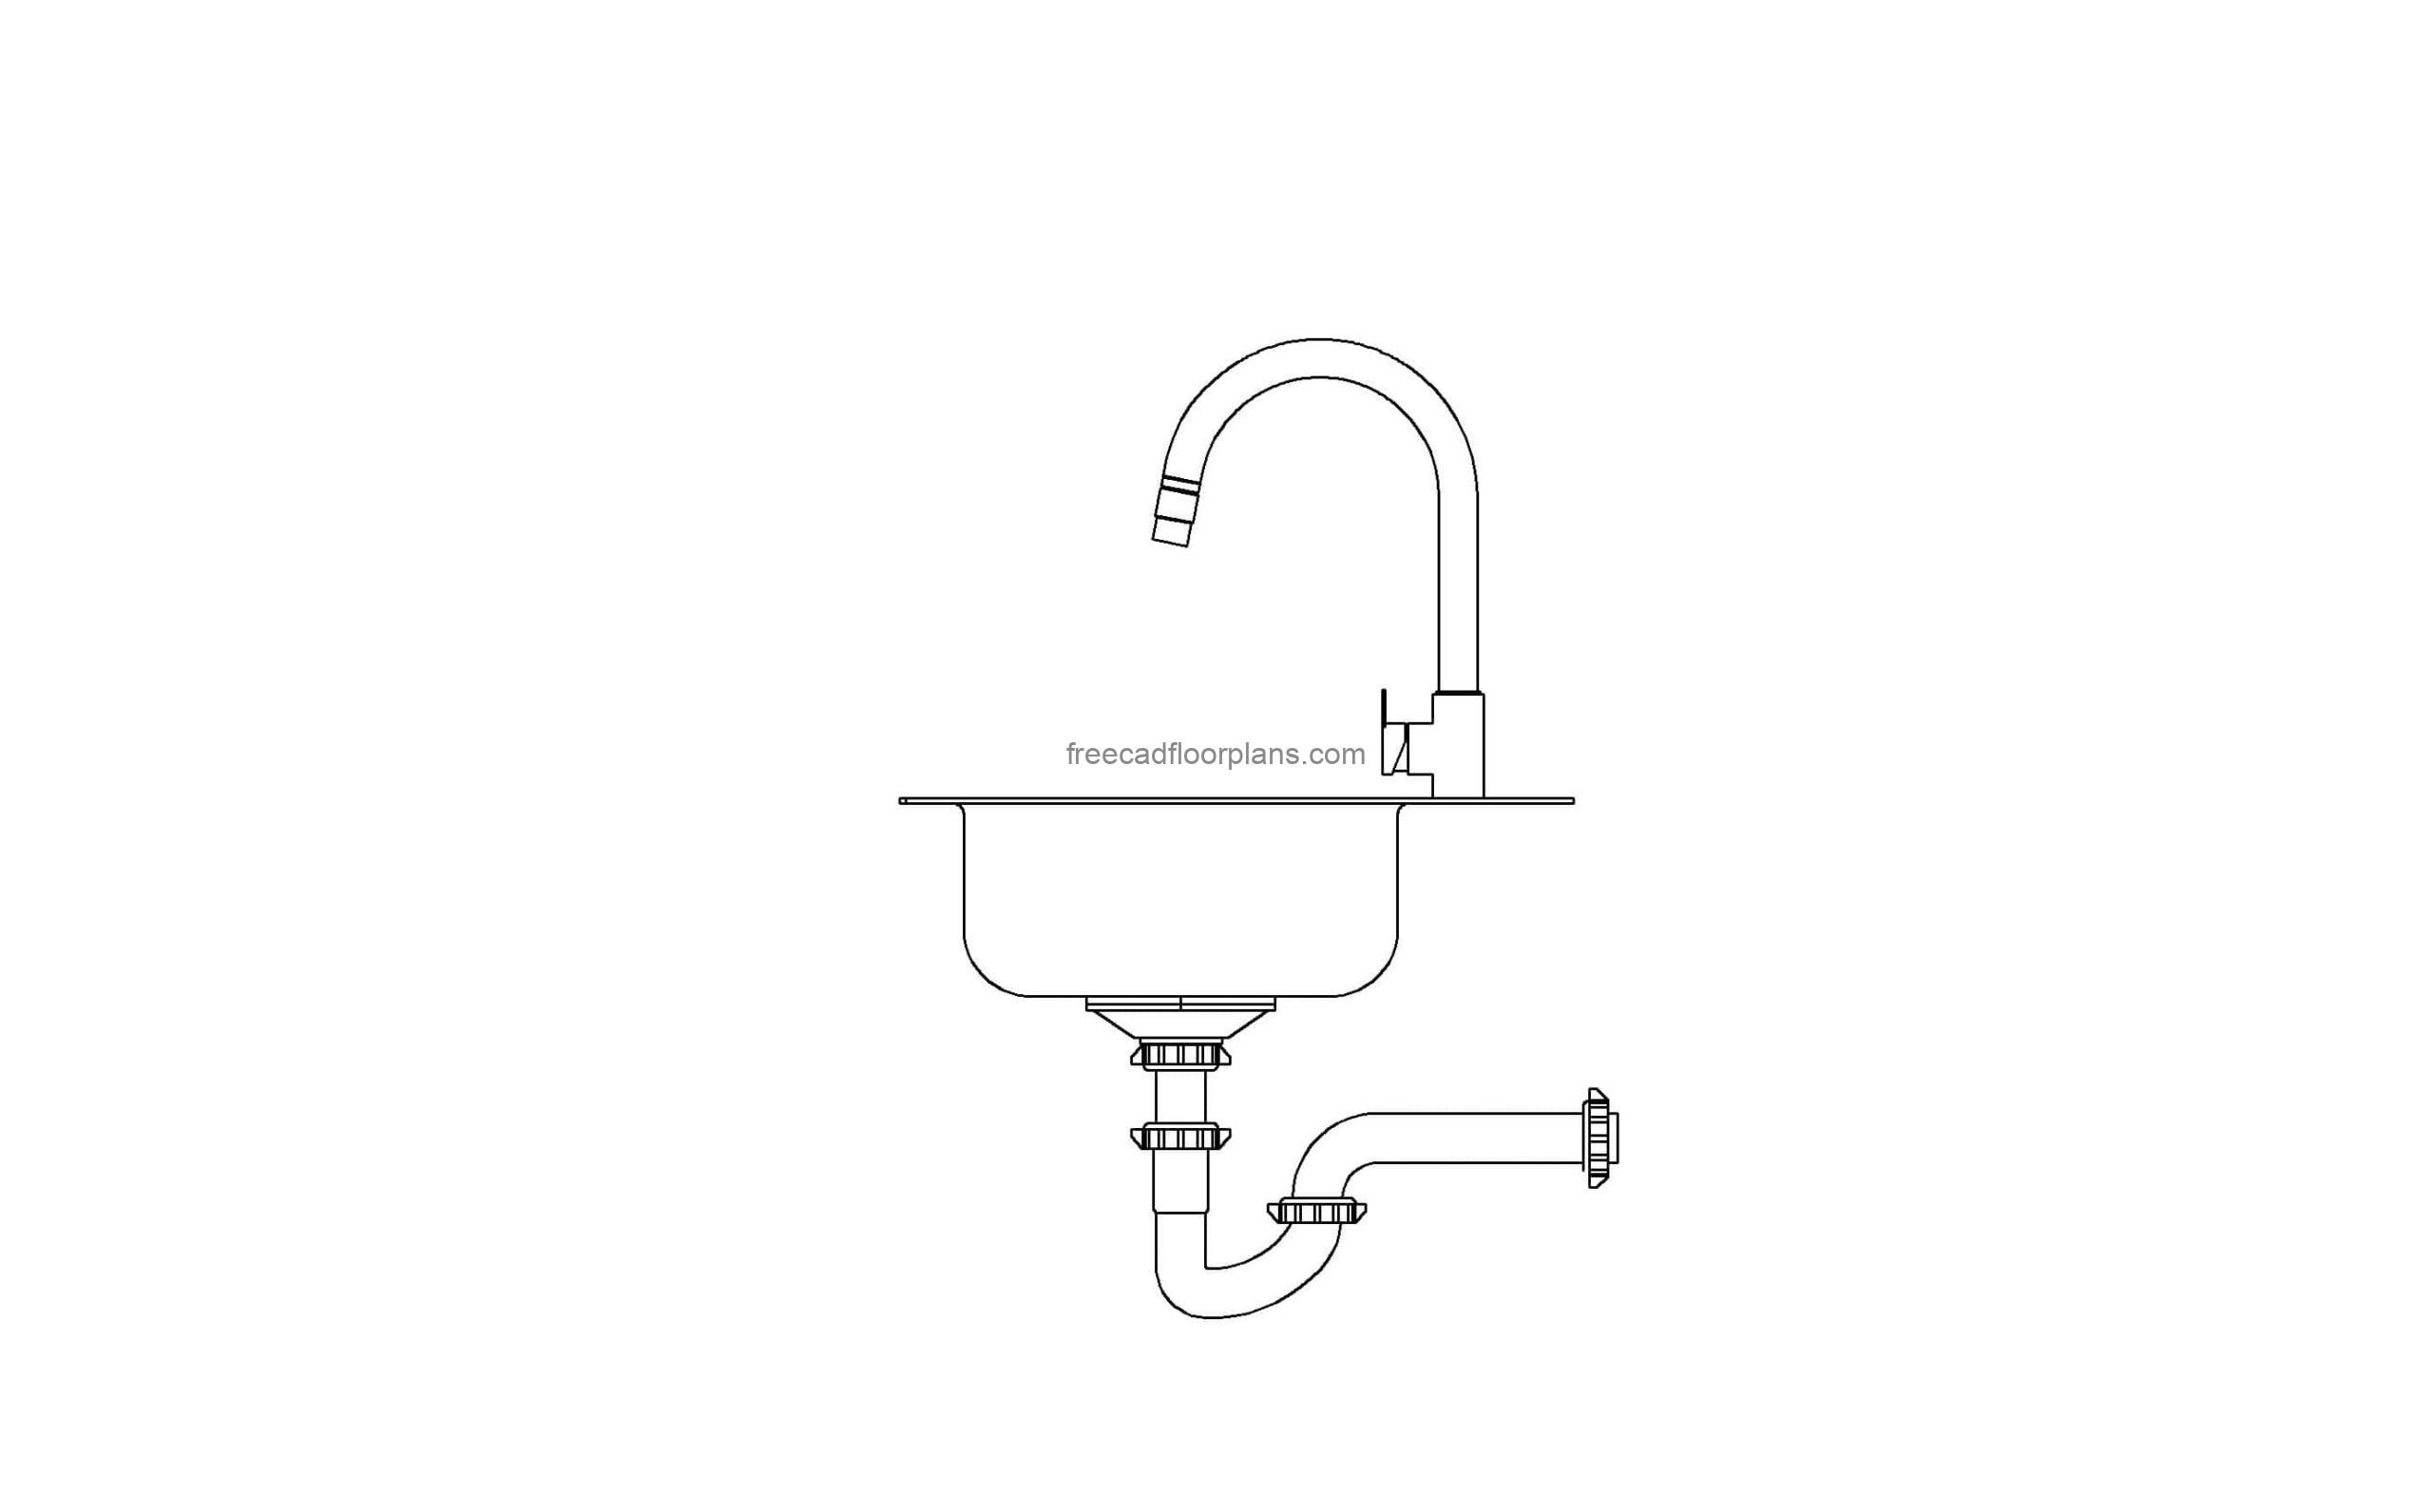 autocad drawing of a kitchen sink side elevation 2d view, dwg file free for download